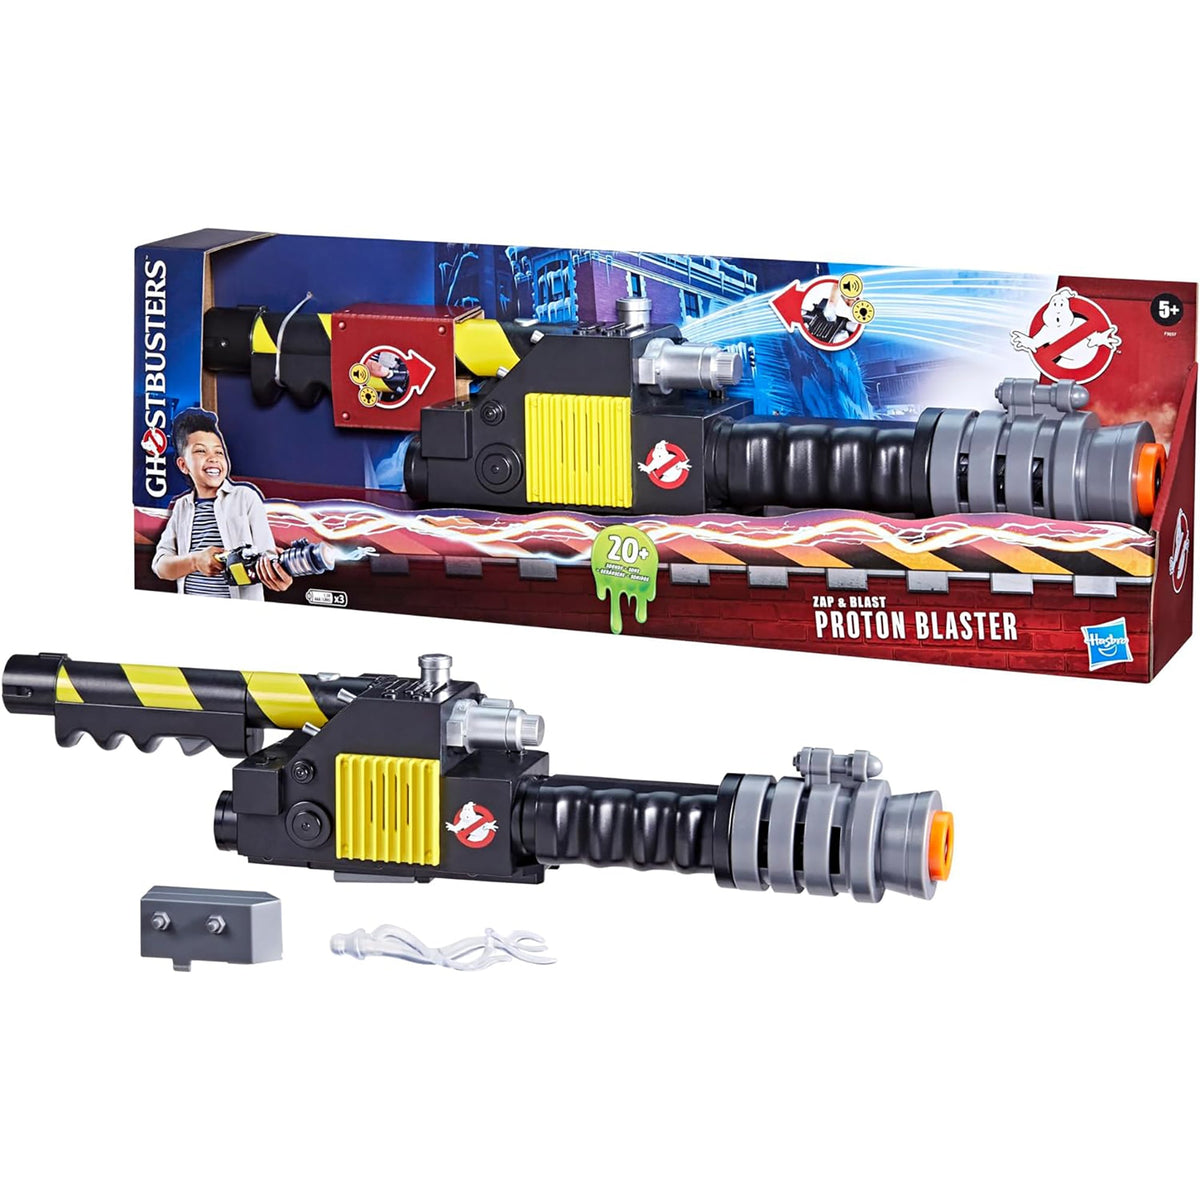 HASBRO Toys & Games Ghostbusters Zap and Blast Proton Blaster, 22 Inches, 1 Count